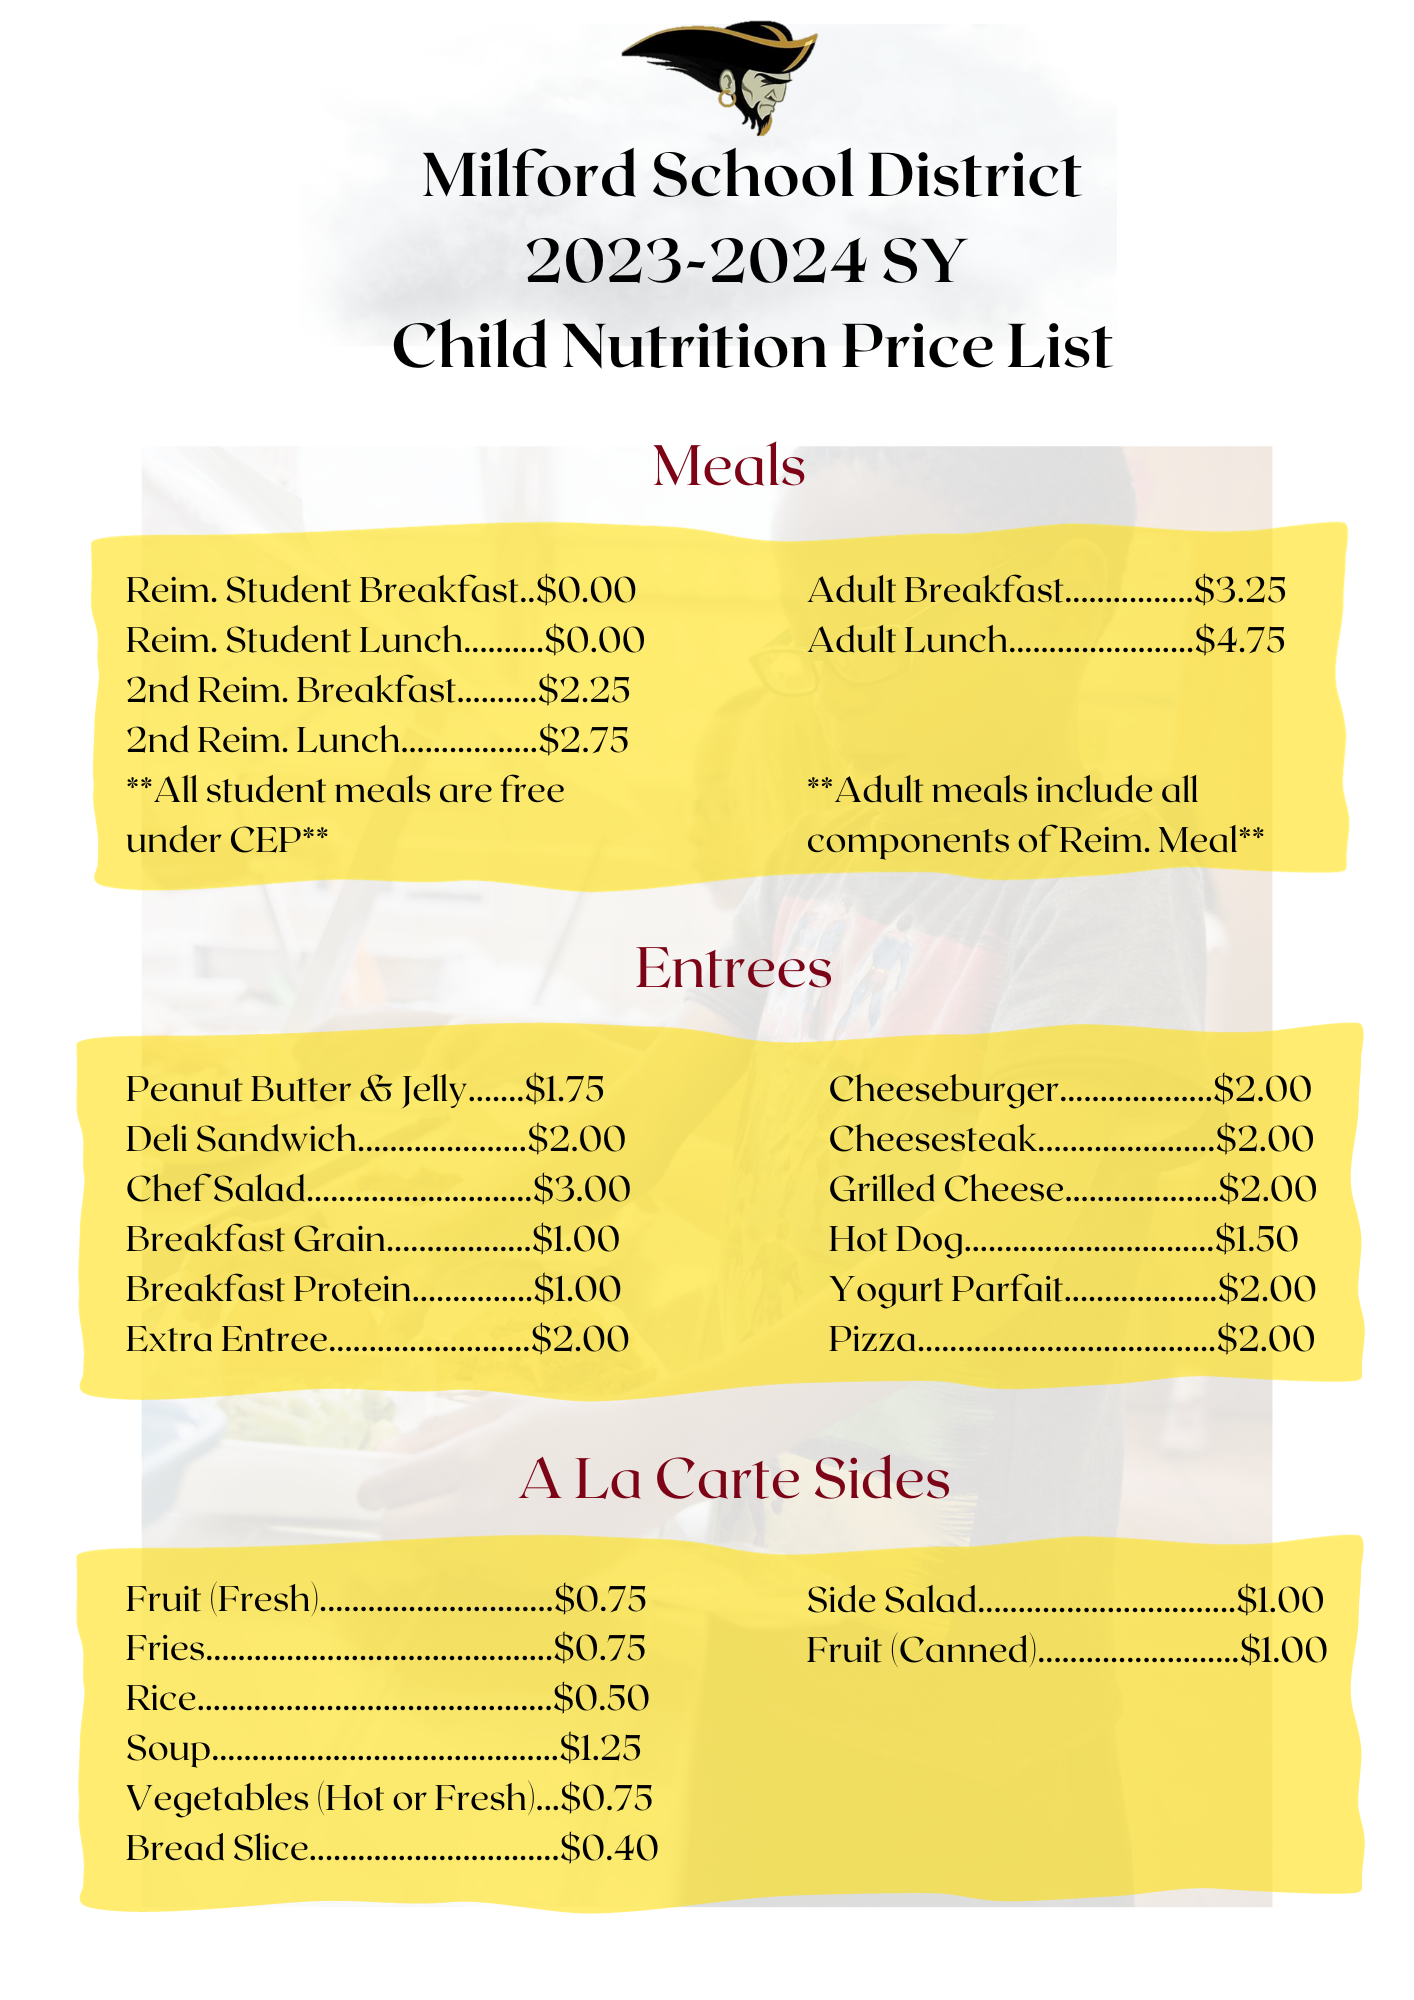 Milford School District 2023-2024 SY Child Nutrition Price List.png